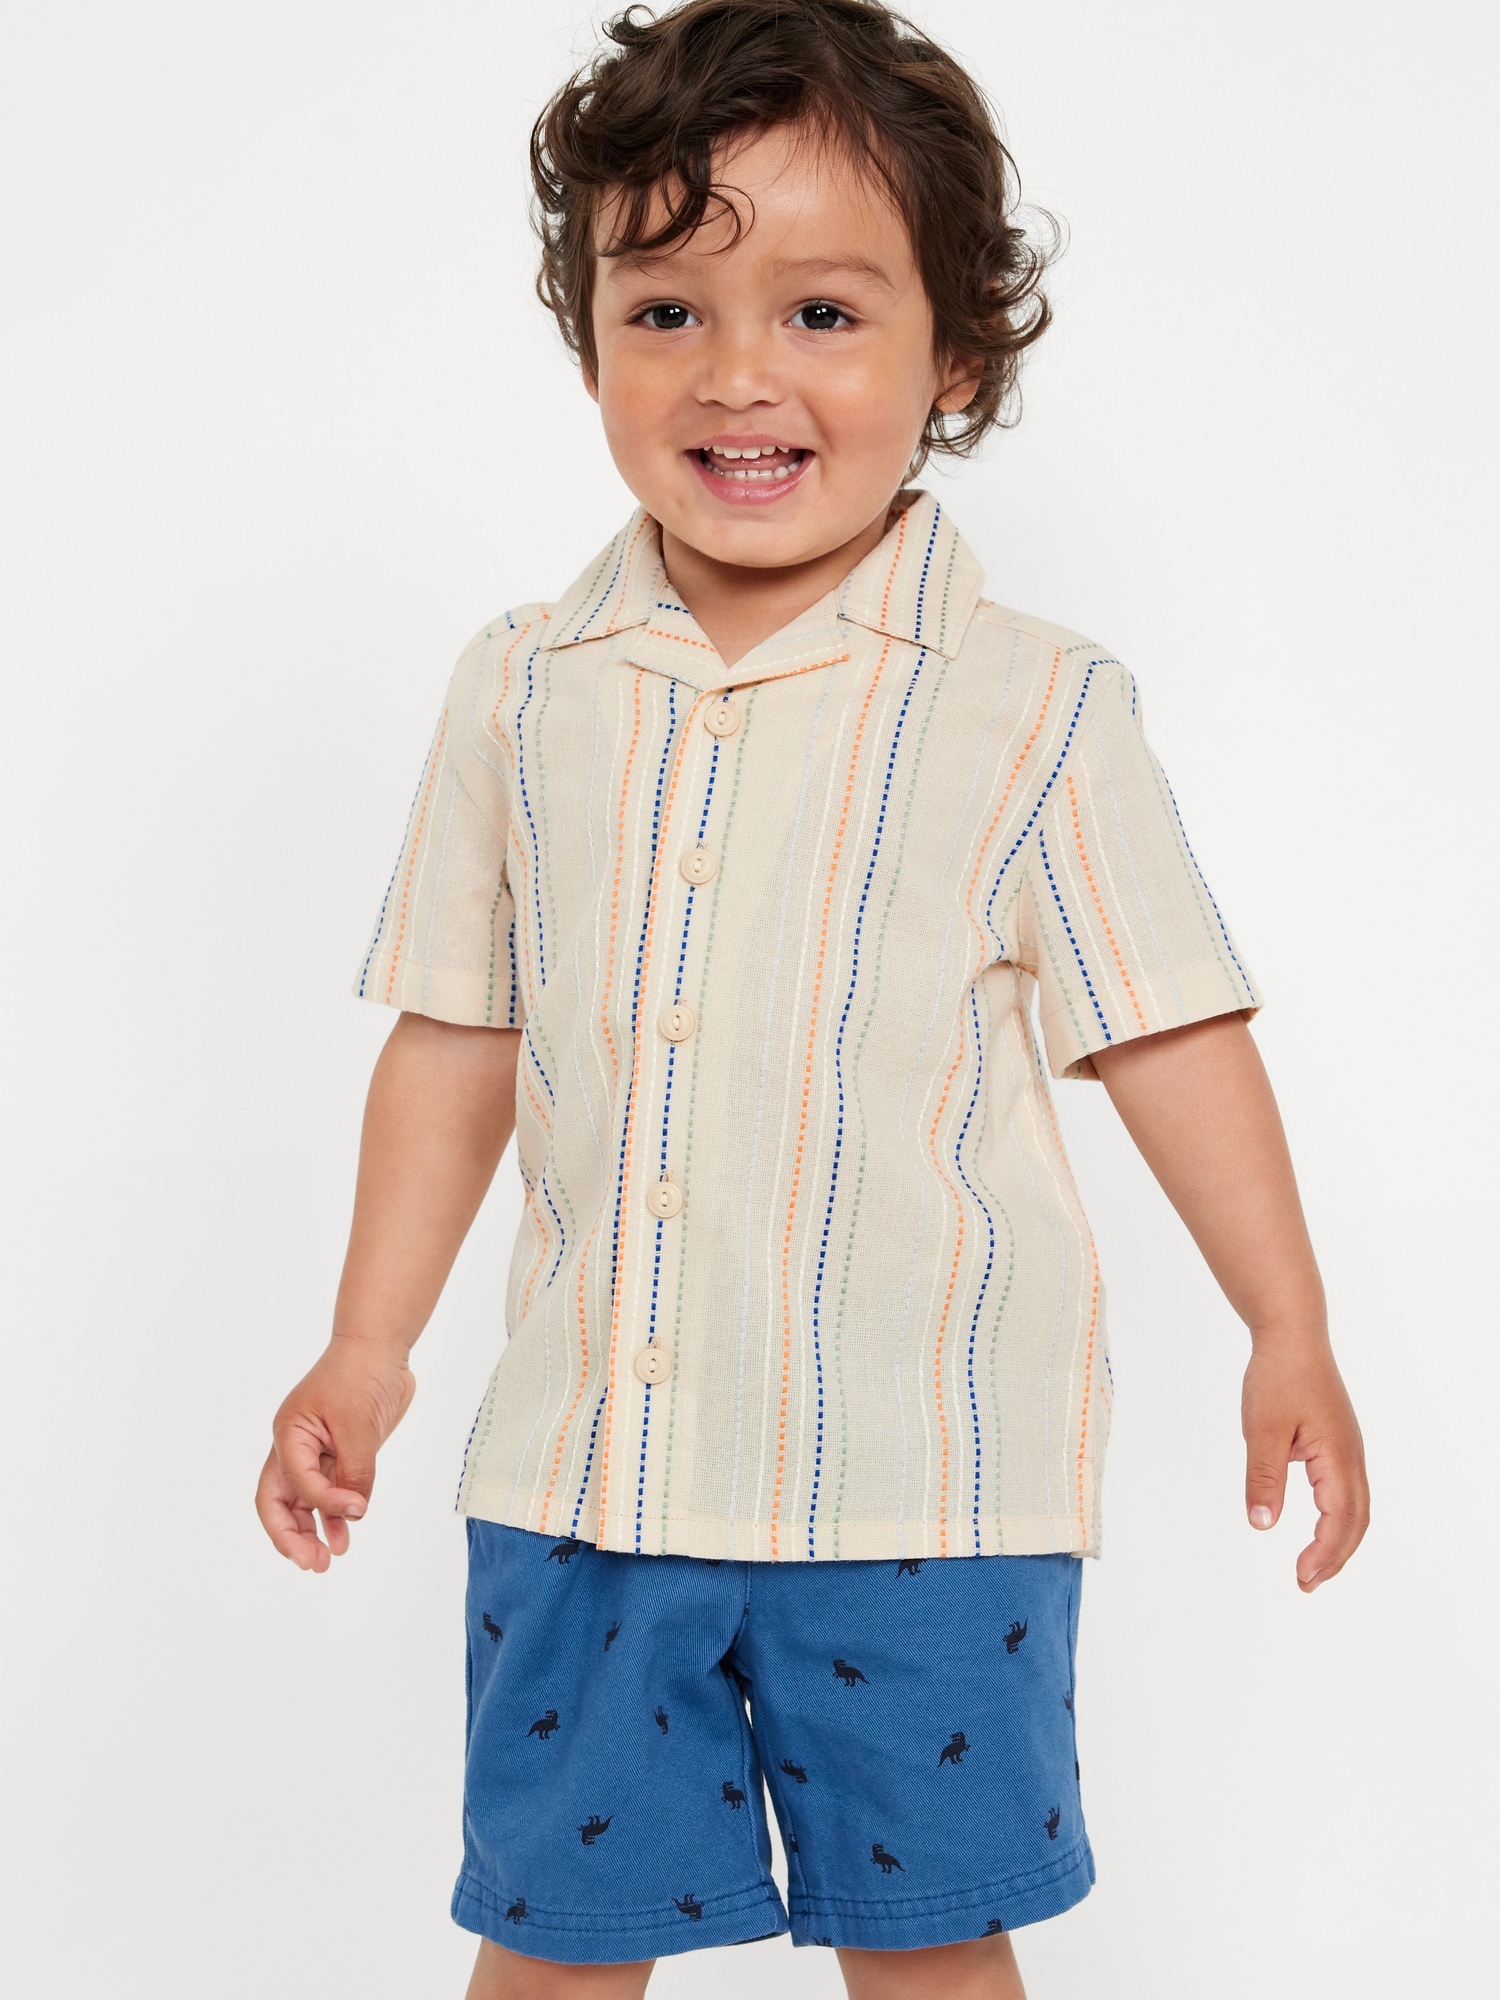 Textured Striped Dobby Shirt for Toddler Boys Hot Deal